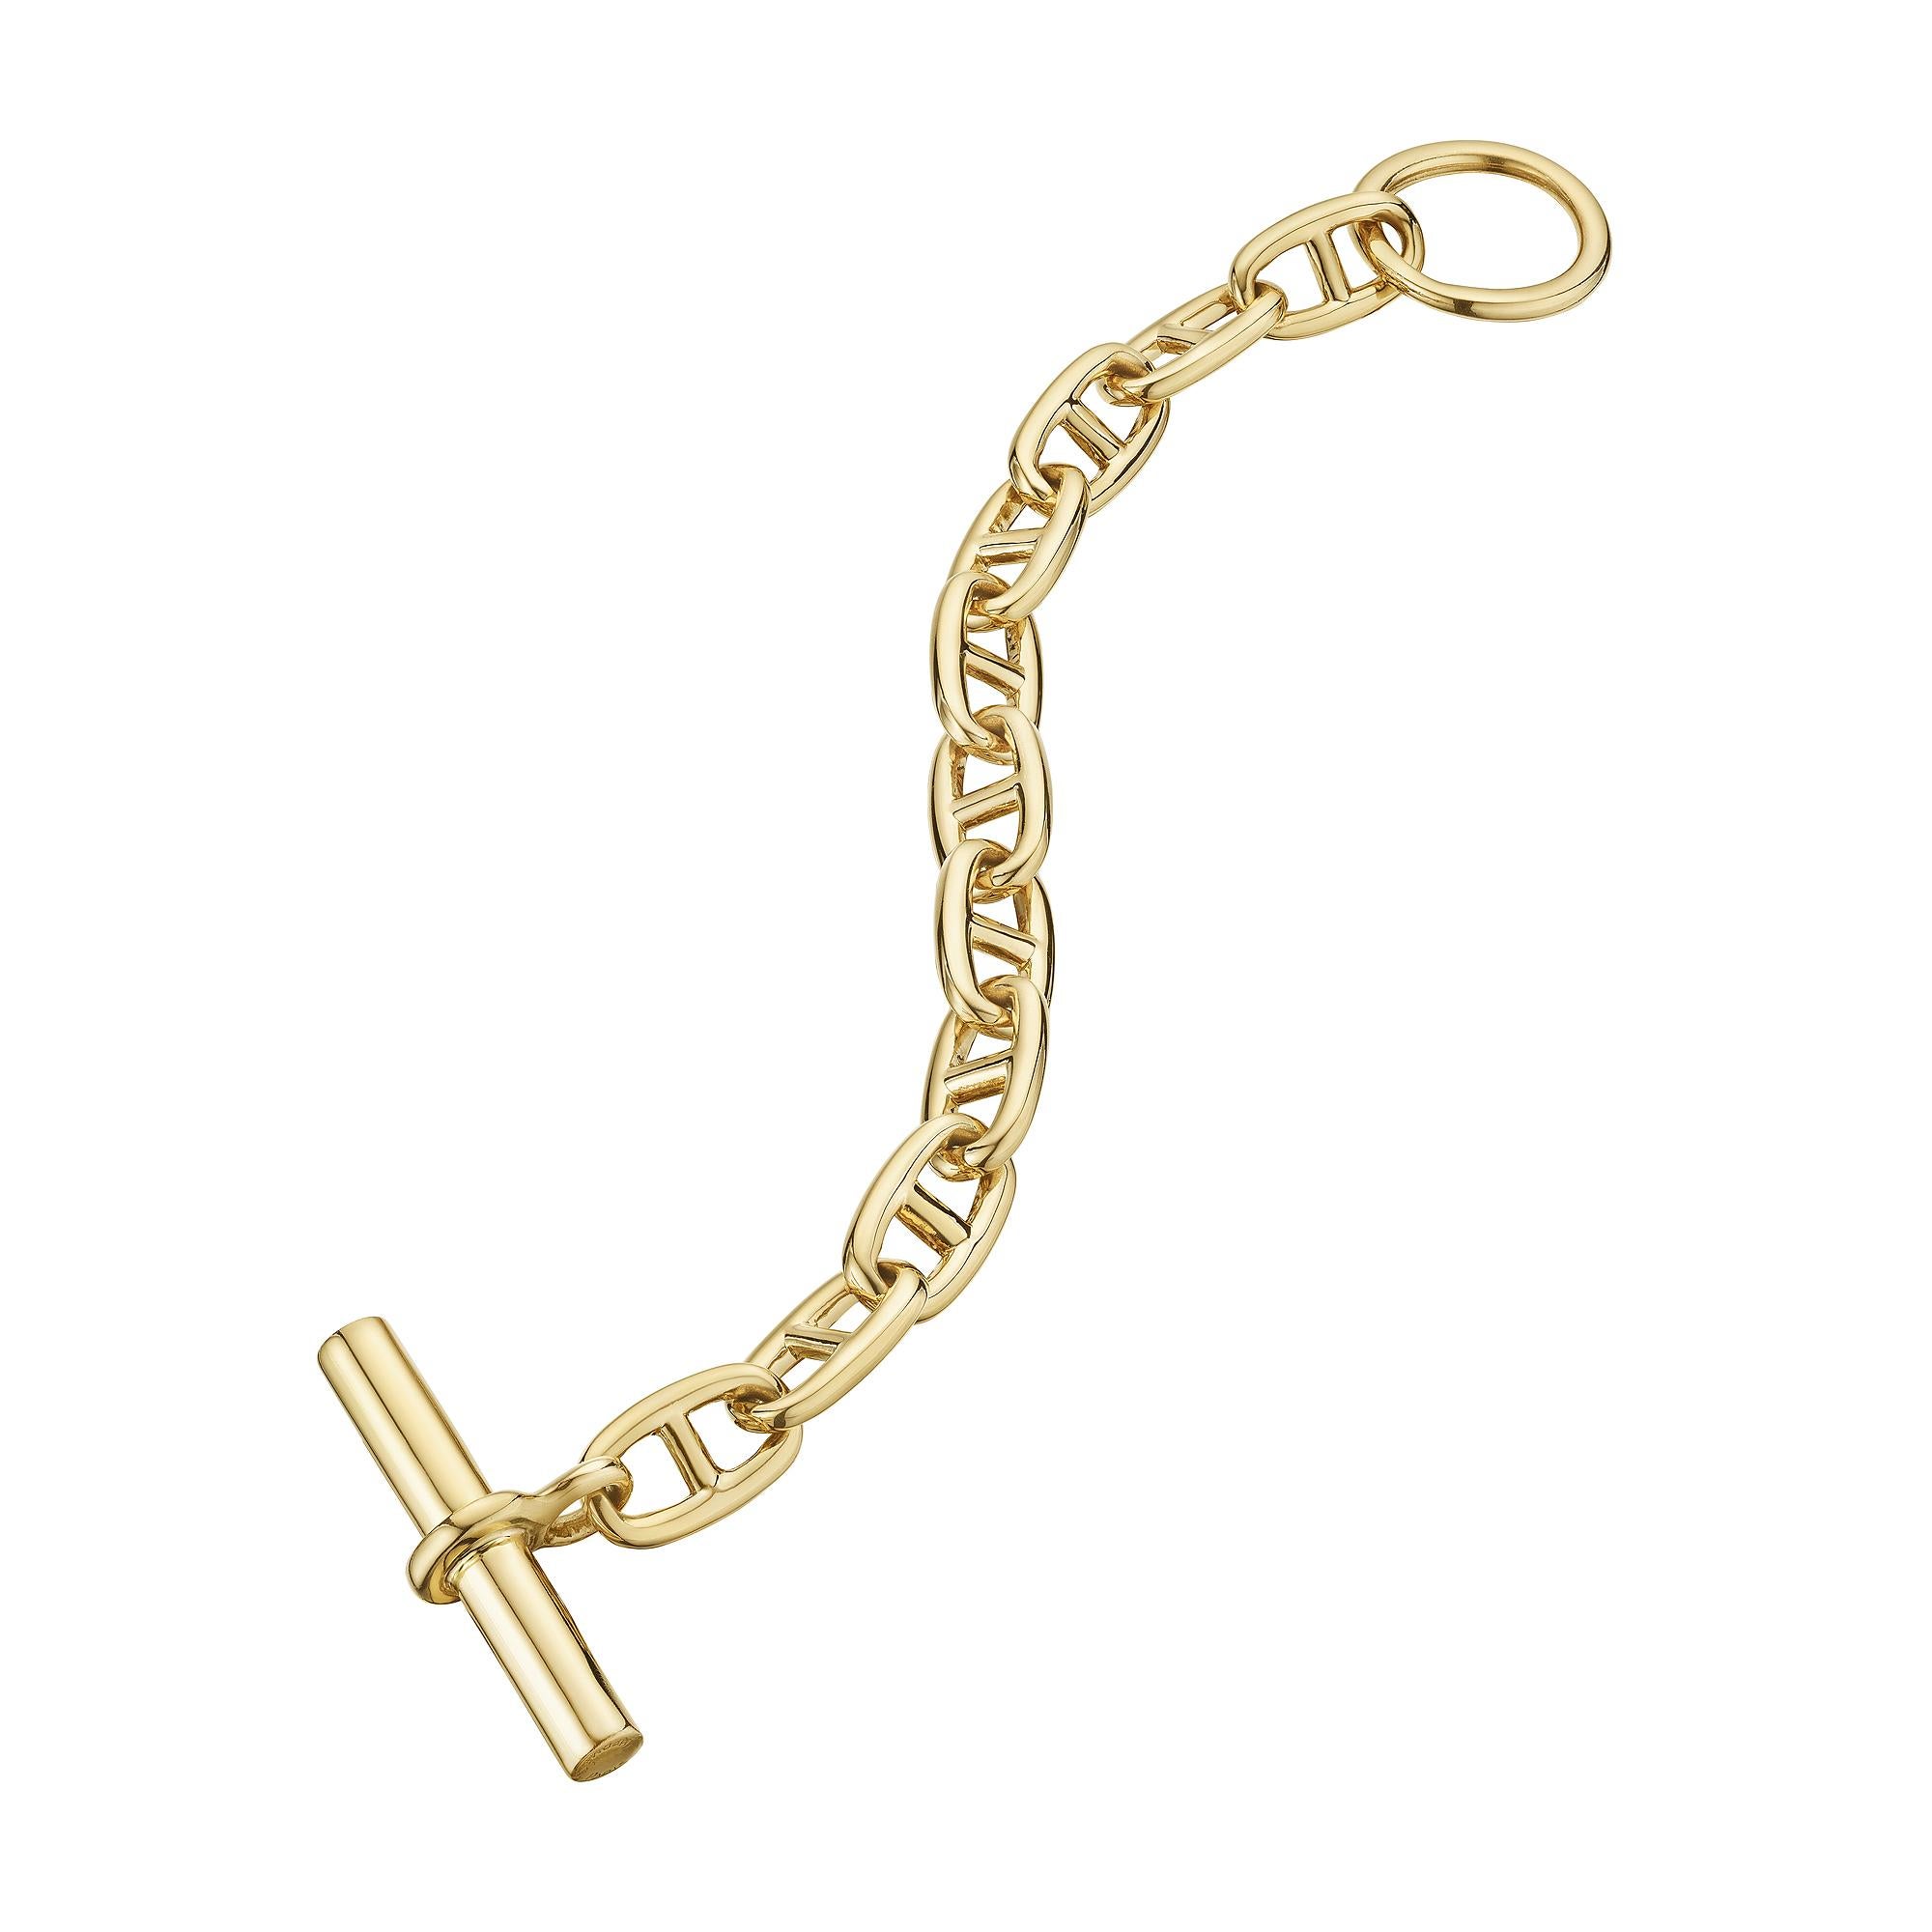 Bold and uncompromising this Hermes Paris modernist 'chaine d'ancre' toggle medium link bracelet is the statement piece you have been searching for.  With 11 links, this polished 18 karat yellow gold bracelet is extraordinarily collectible and